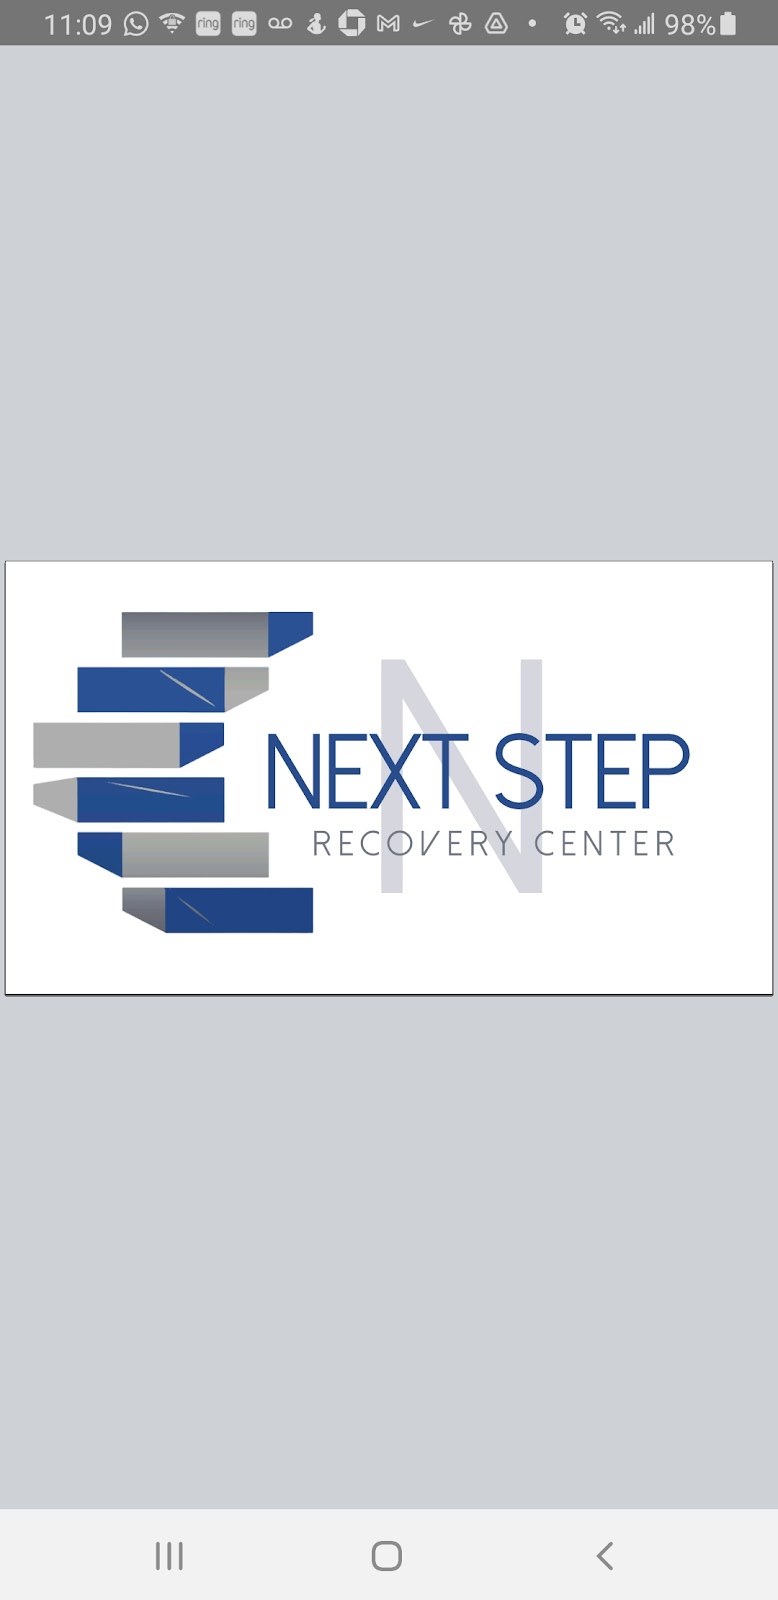 Next Step Recovery Center